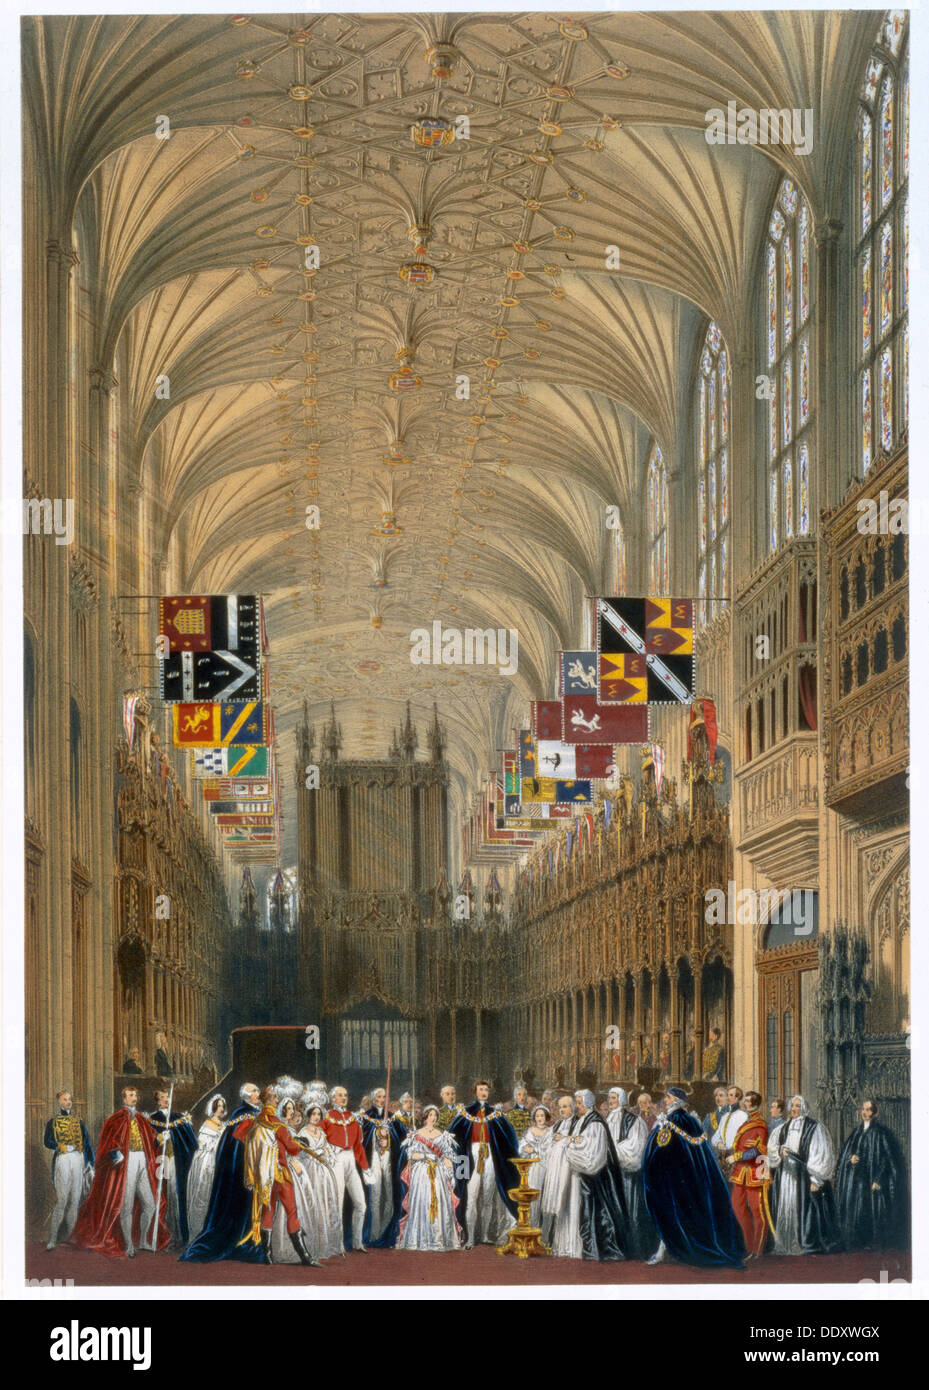 Queen Victoria and Prince Albert at a service in St George's Chapel, Windsor Castle, 1838. Artist: James Baker Pyne Stock Photo